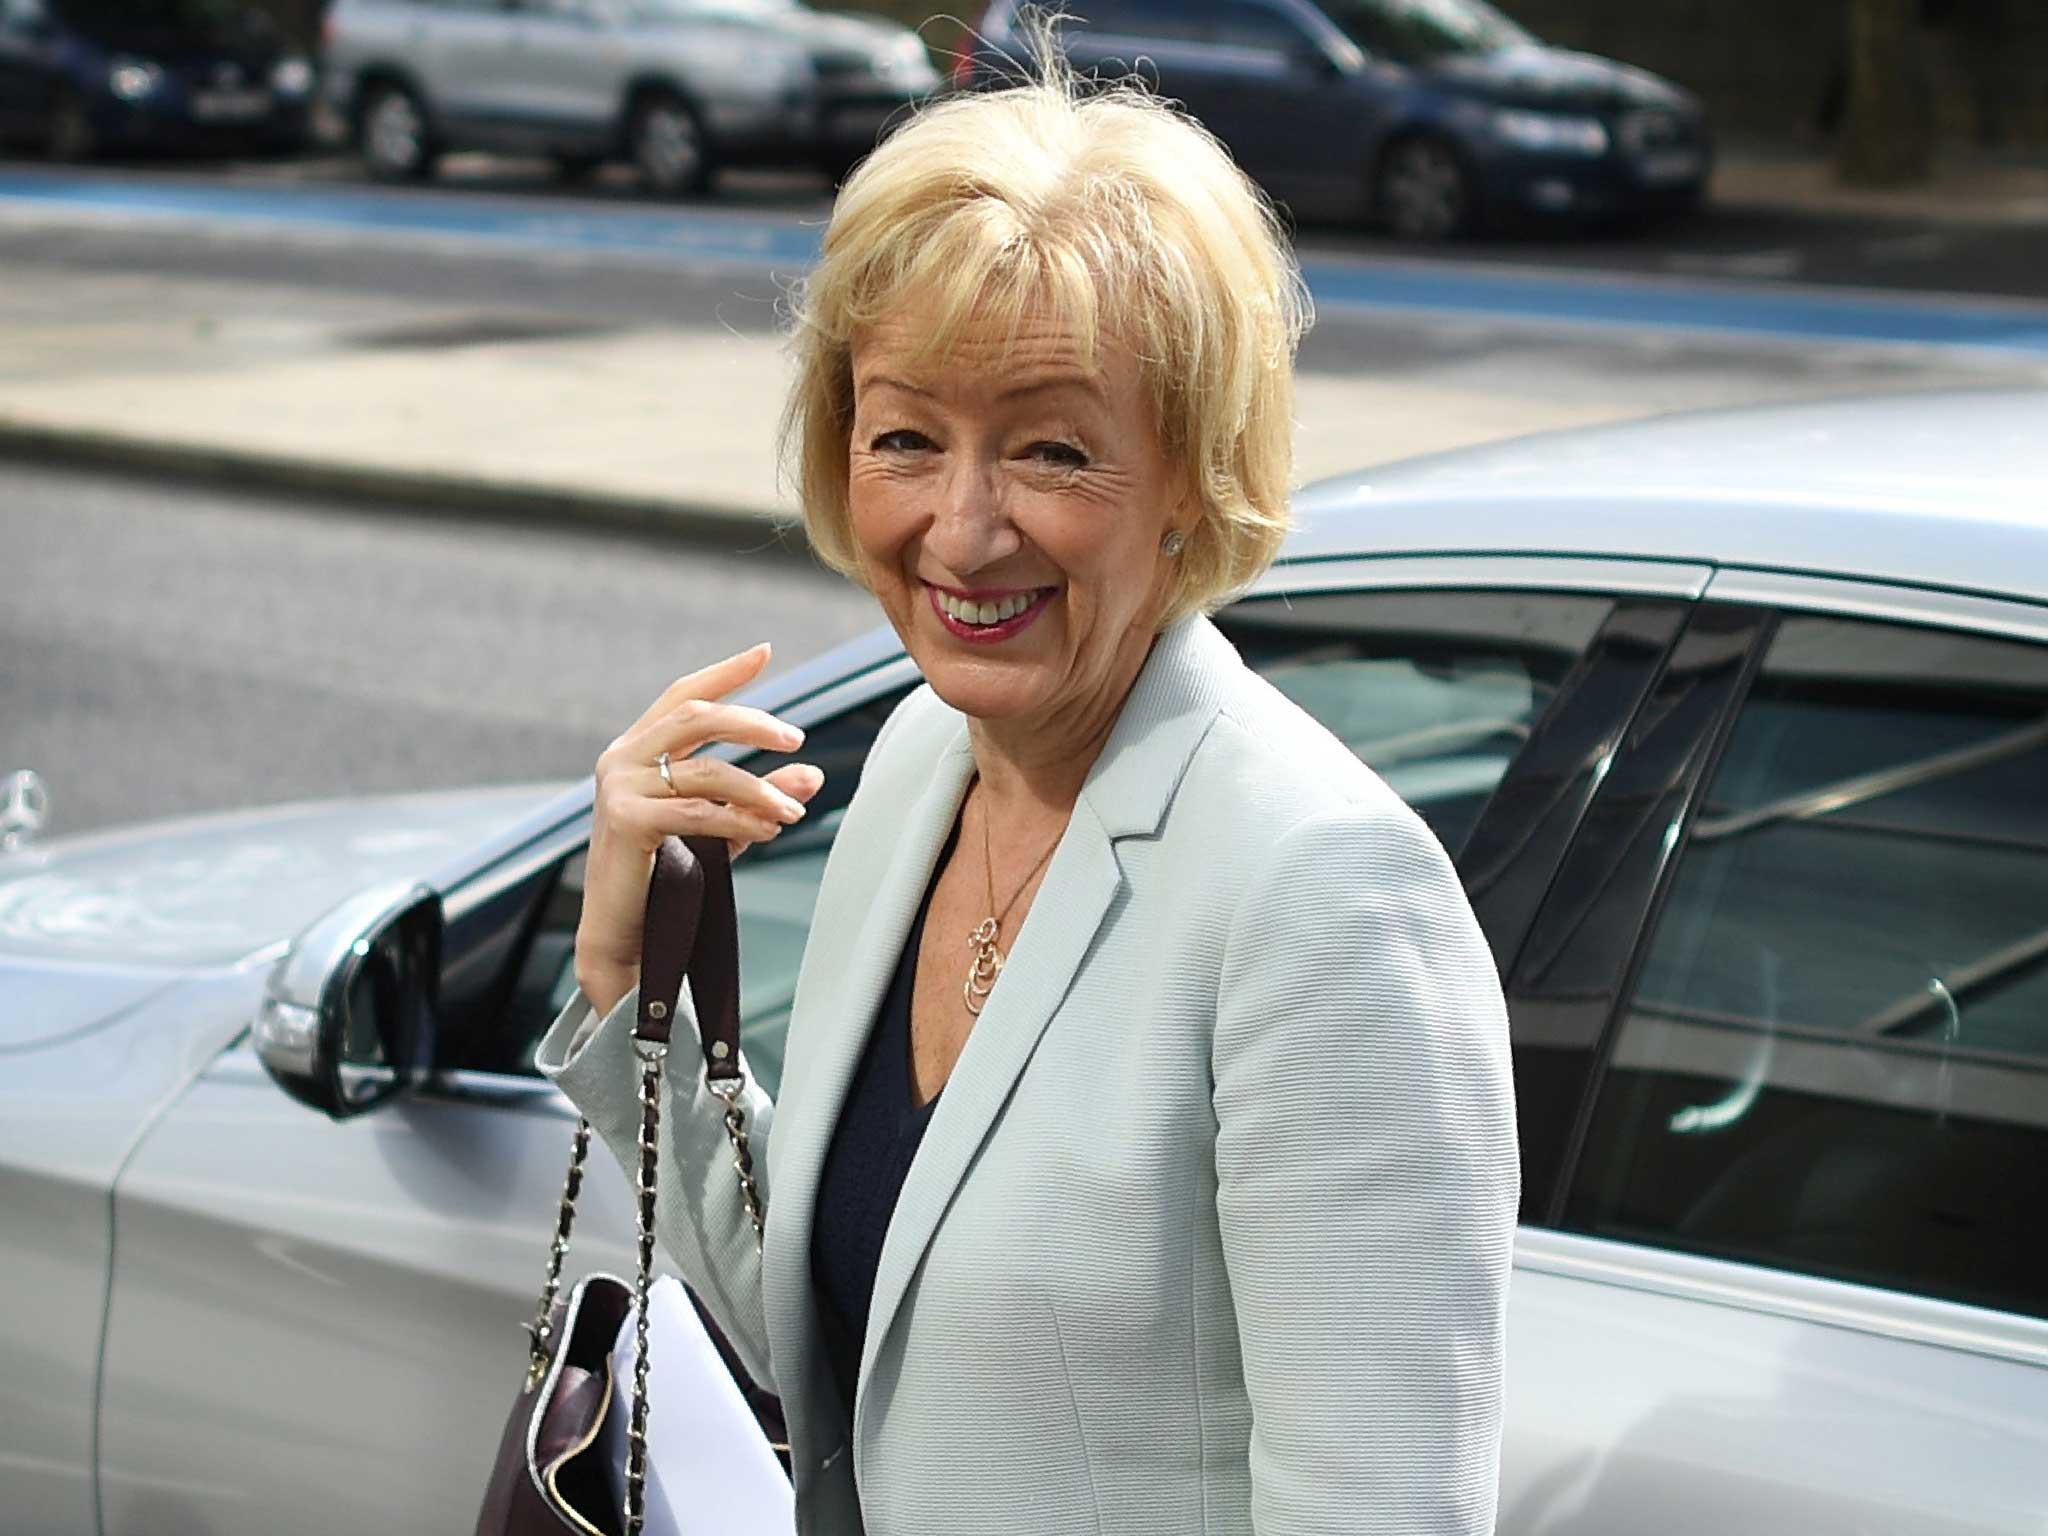 British Conservative Party leadership candidate Andrea Leadsom arrives to speaks during a leadership rally in central London